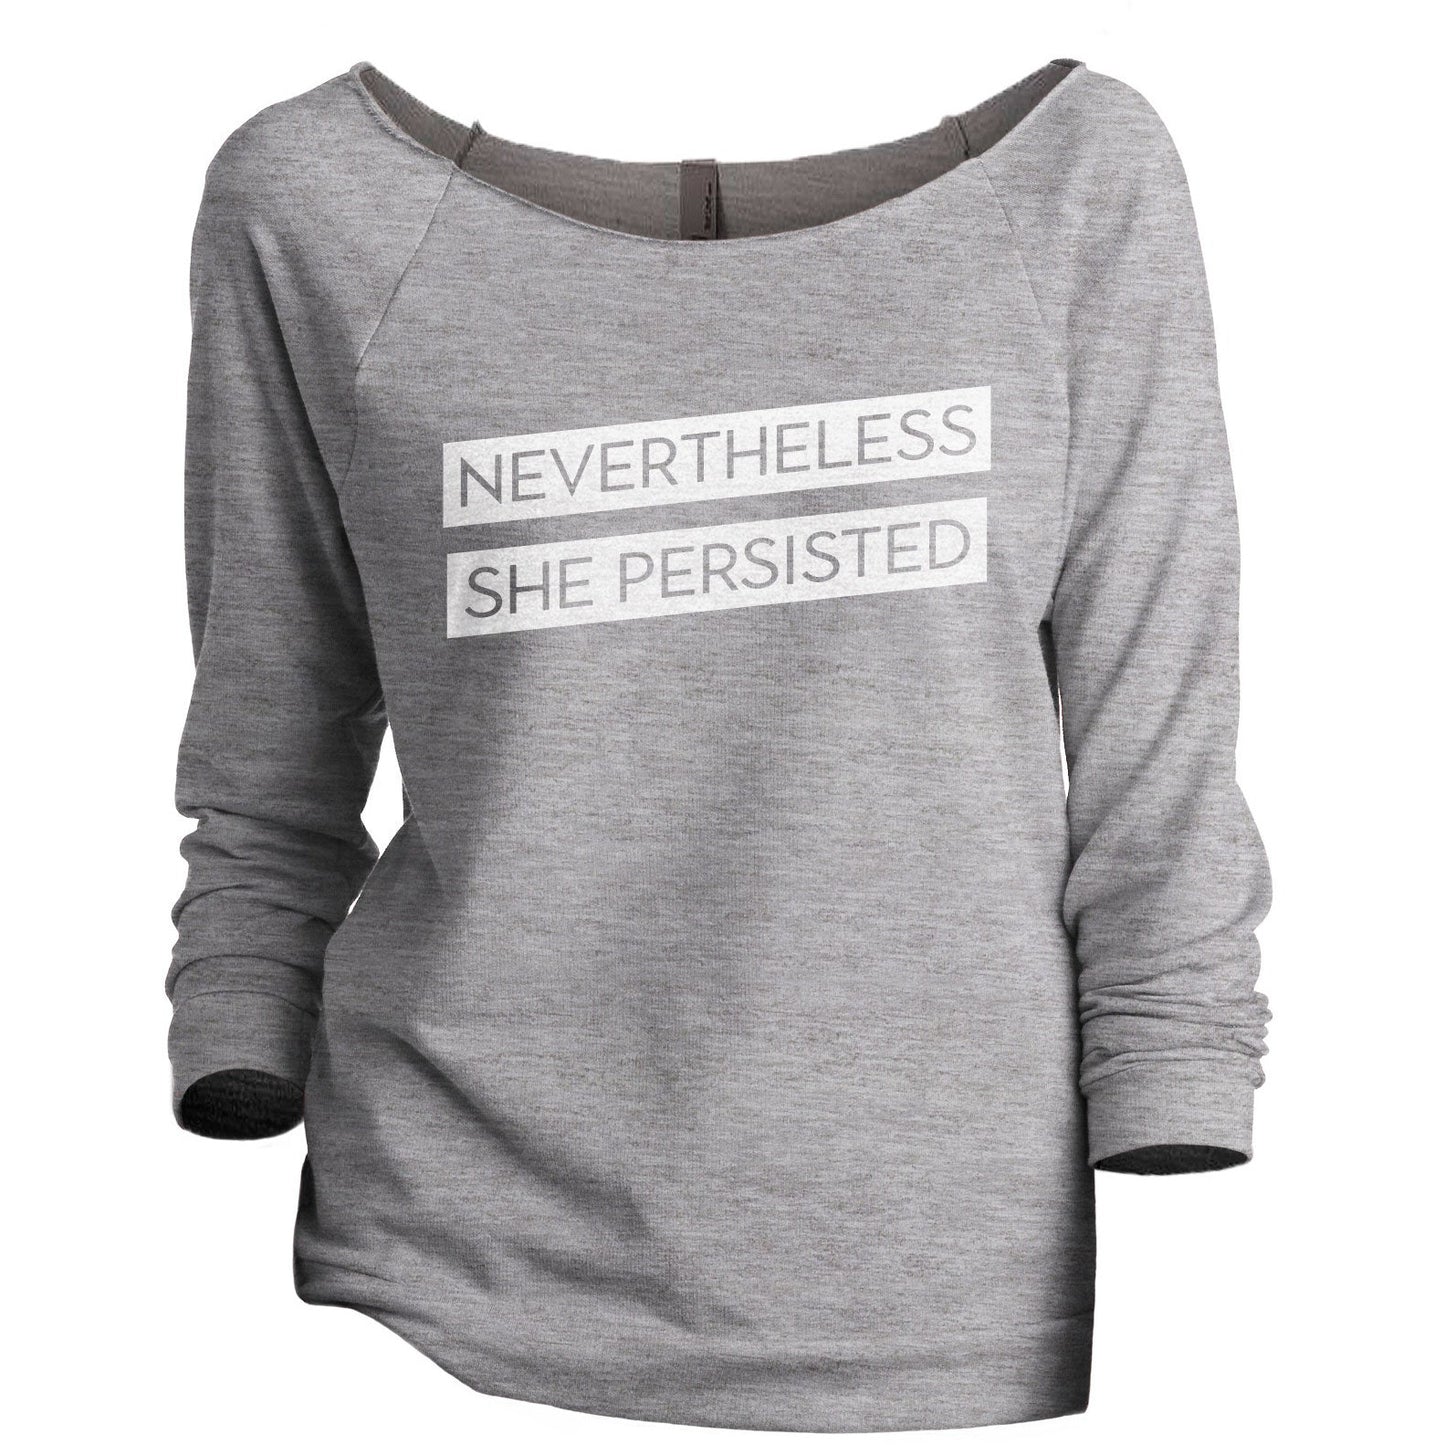 Nevertheless She Persisted Women's Graphic Printed Lightweight Slouchy 3/4 Sleeves Sweatshirt Sport Grey